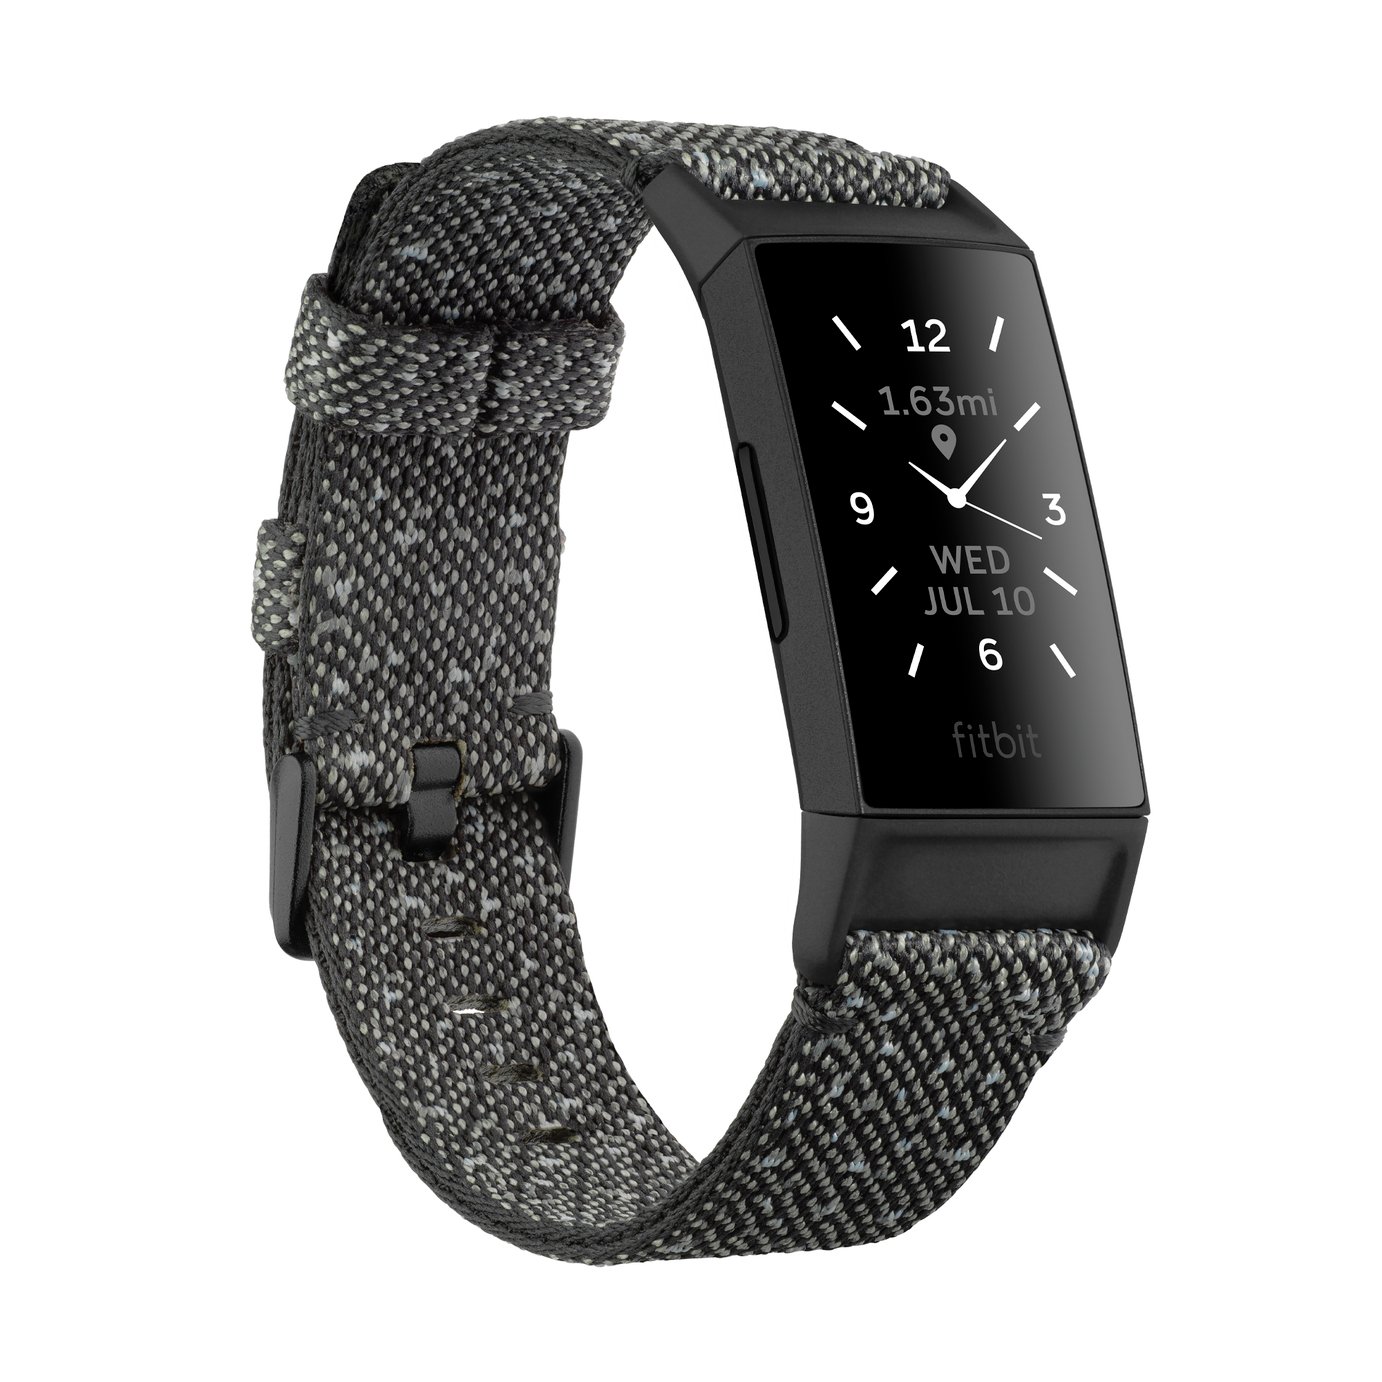 Fitbit Charge 4 Fitness Tracker - Granite Black